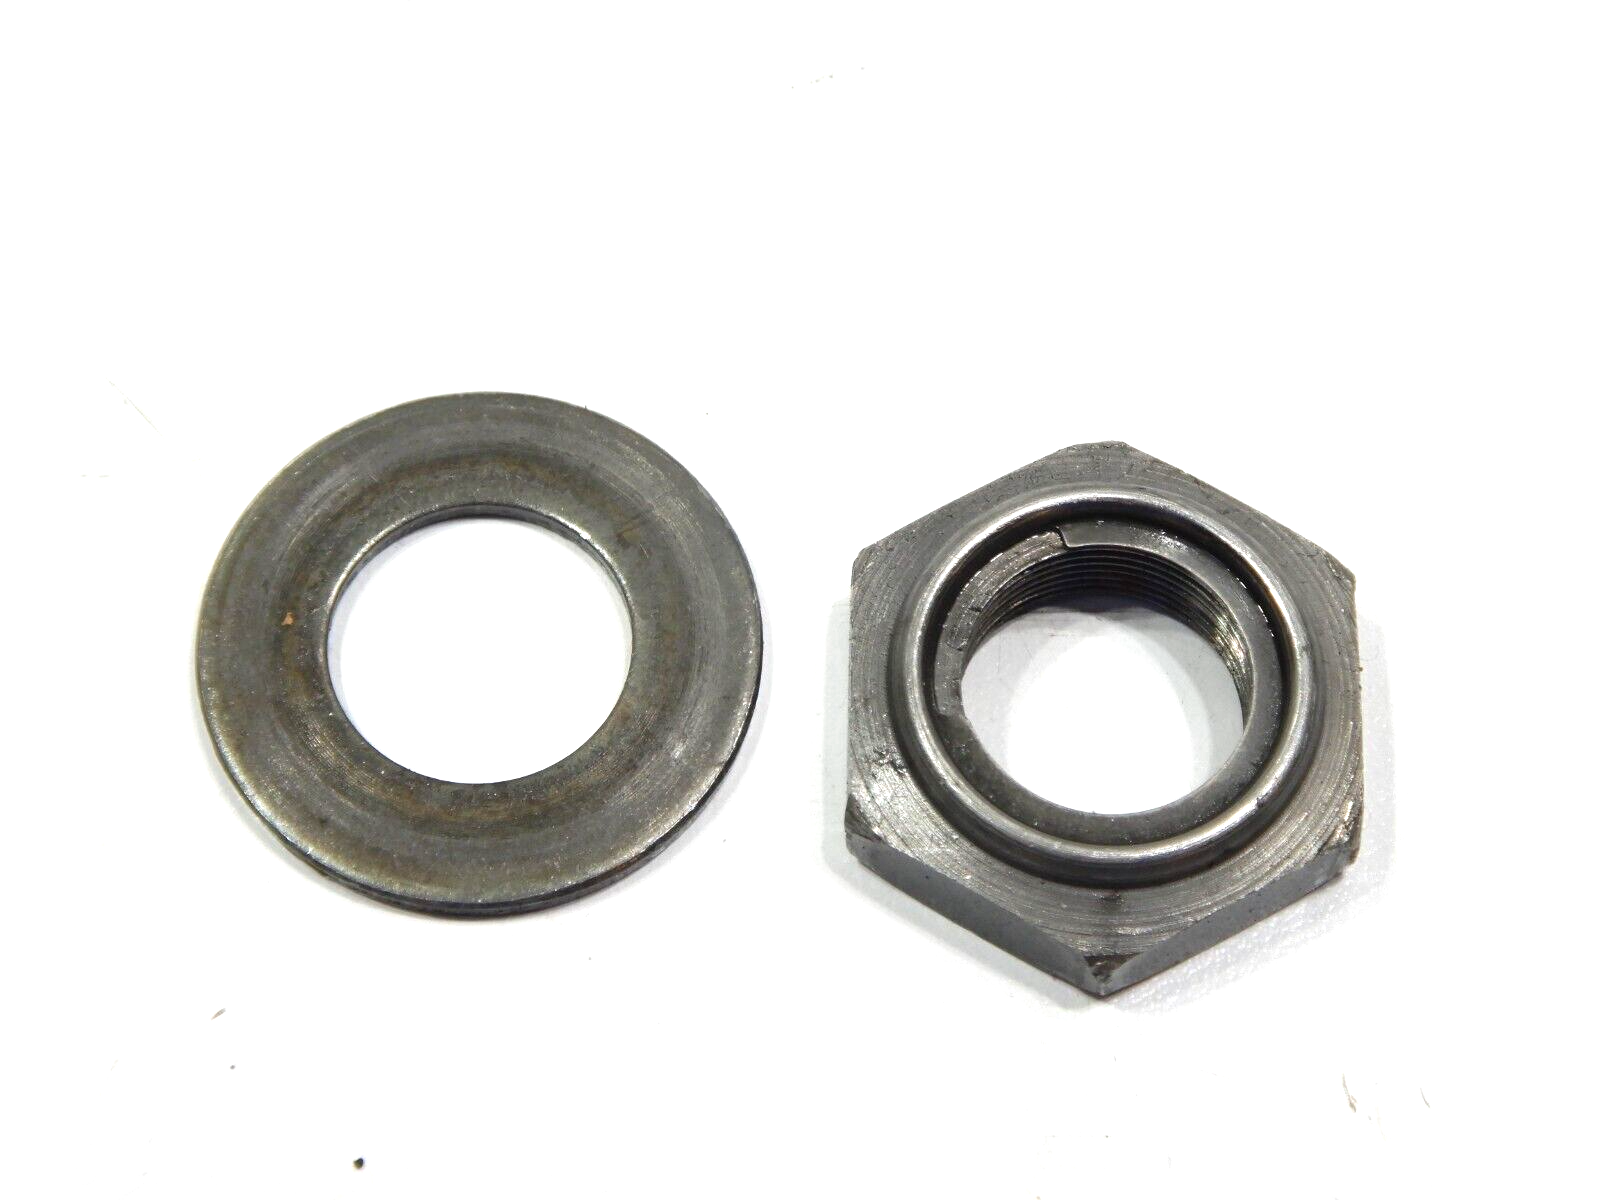 Primary image for Primary drive gear mount nut 1987 87 Yamaha YZ250 YZ 250